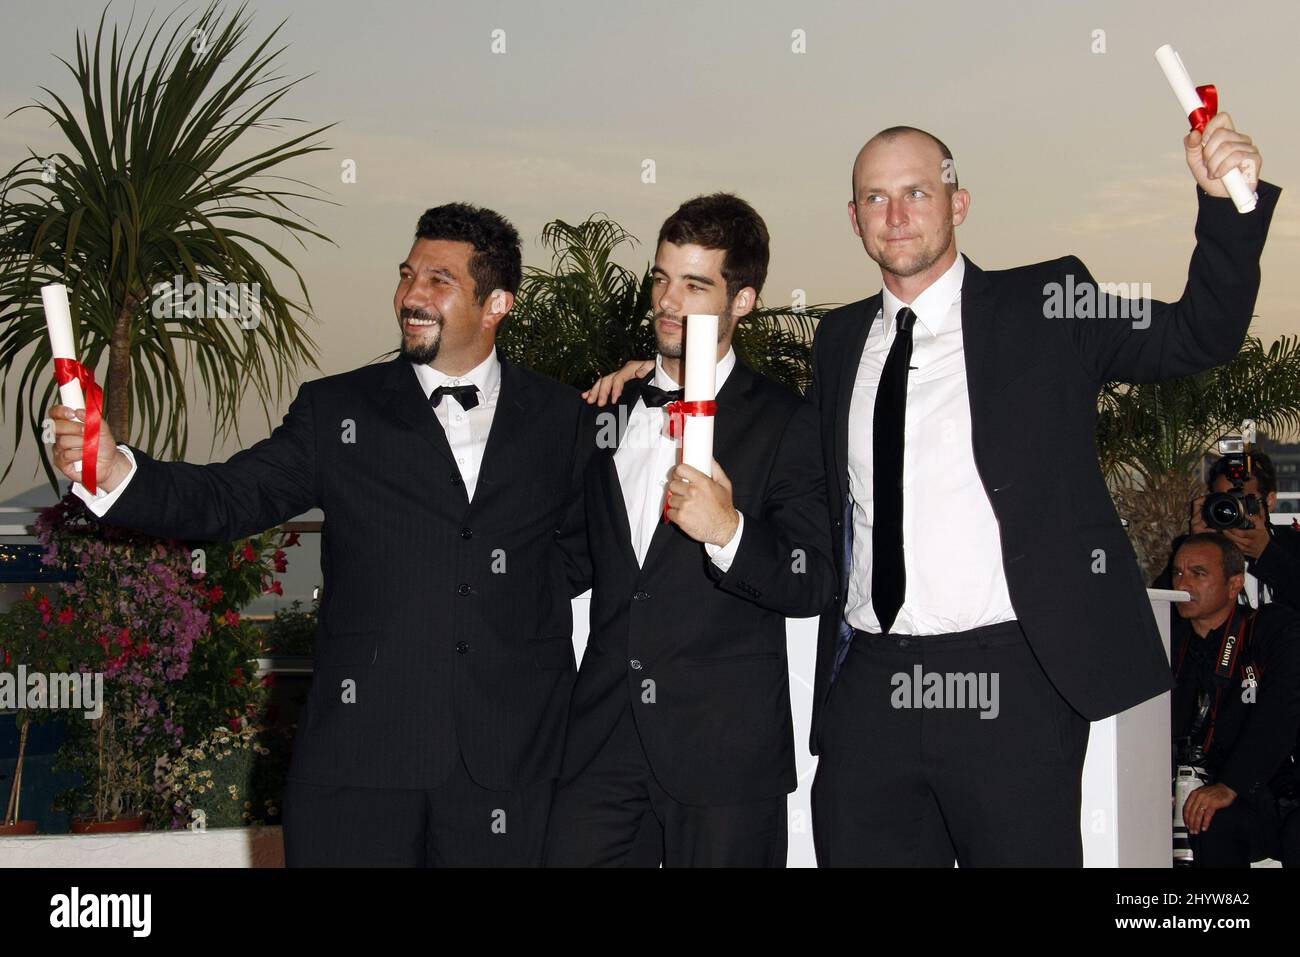 Directors Louis Sutherland (L) and Mark Albiston (R) with their Special Mention award for 'The Six Dollar Fifty Man' and director Joao Salaviza with his Palme d'Or Short Film award for 'Arena' as they attend the Palme d'Or Award Ceremony Photocall at the Palais des Festivals during the 62nd Annual Cannes Film Festival. Stock Photo